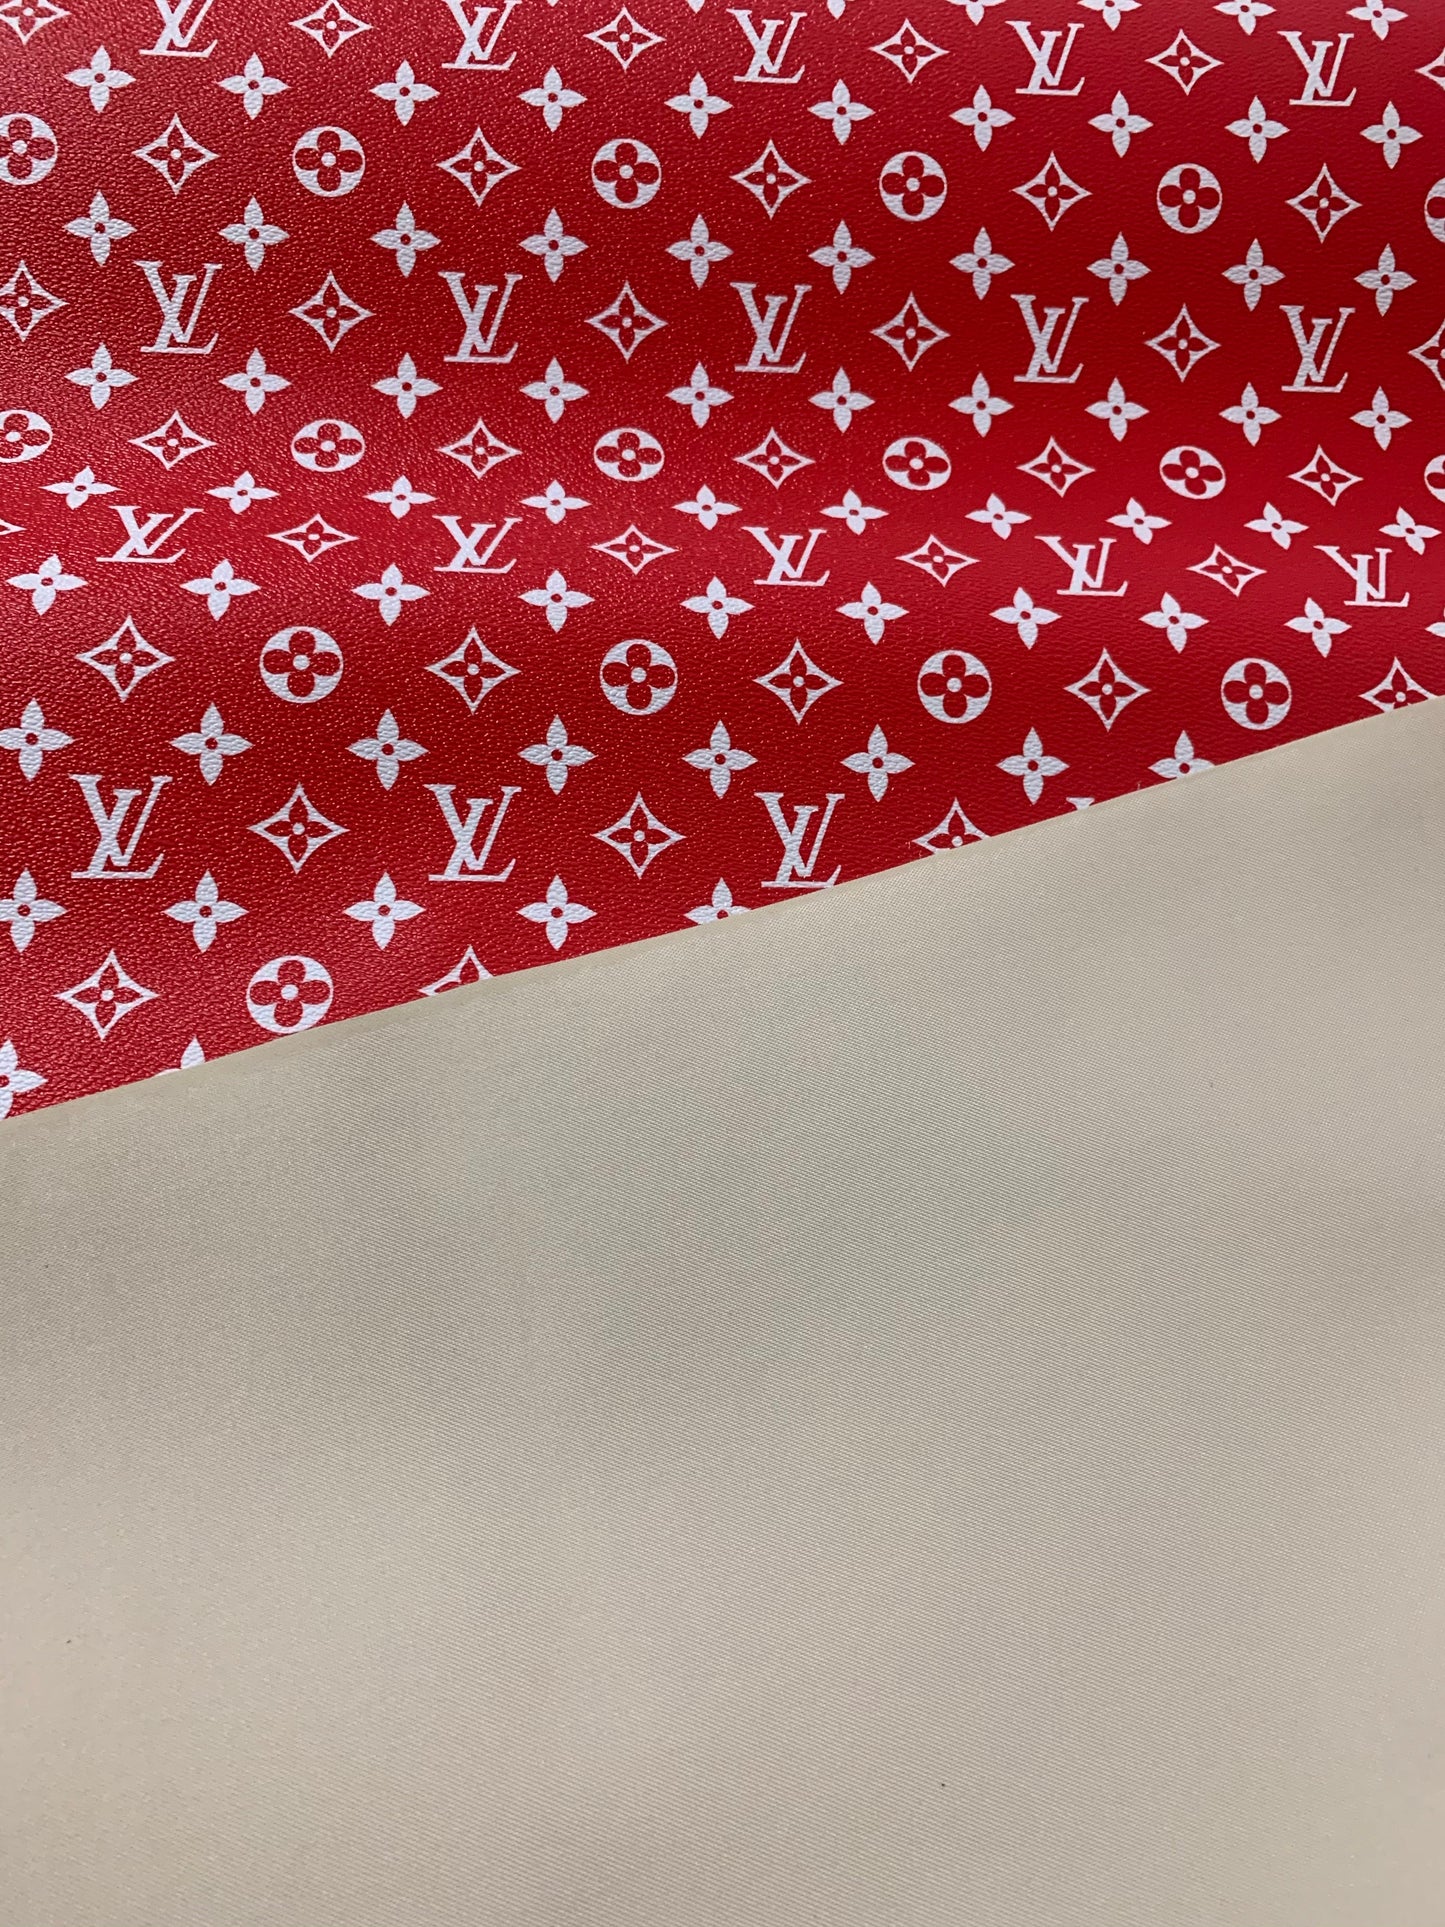 Red LV Classic Designer Inspired Leather Fabric for Custom